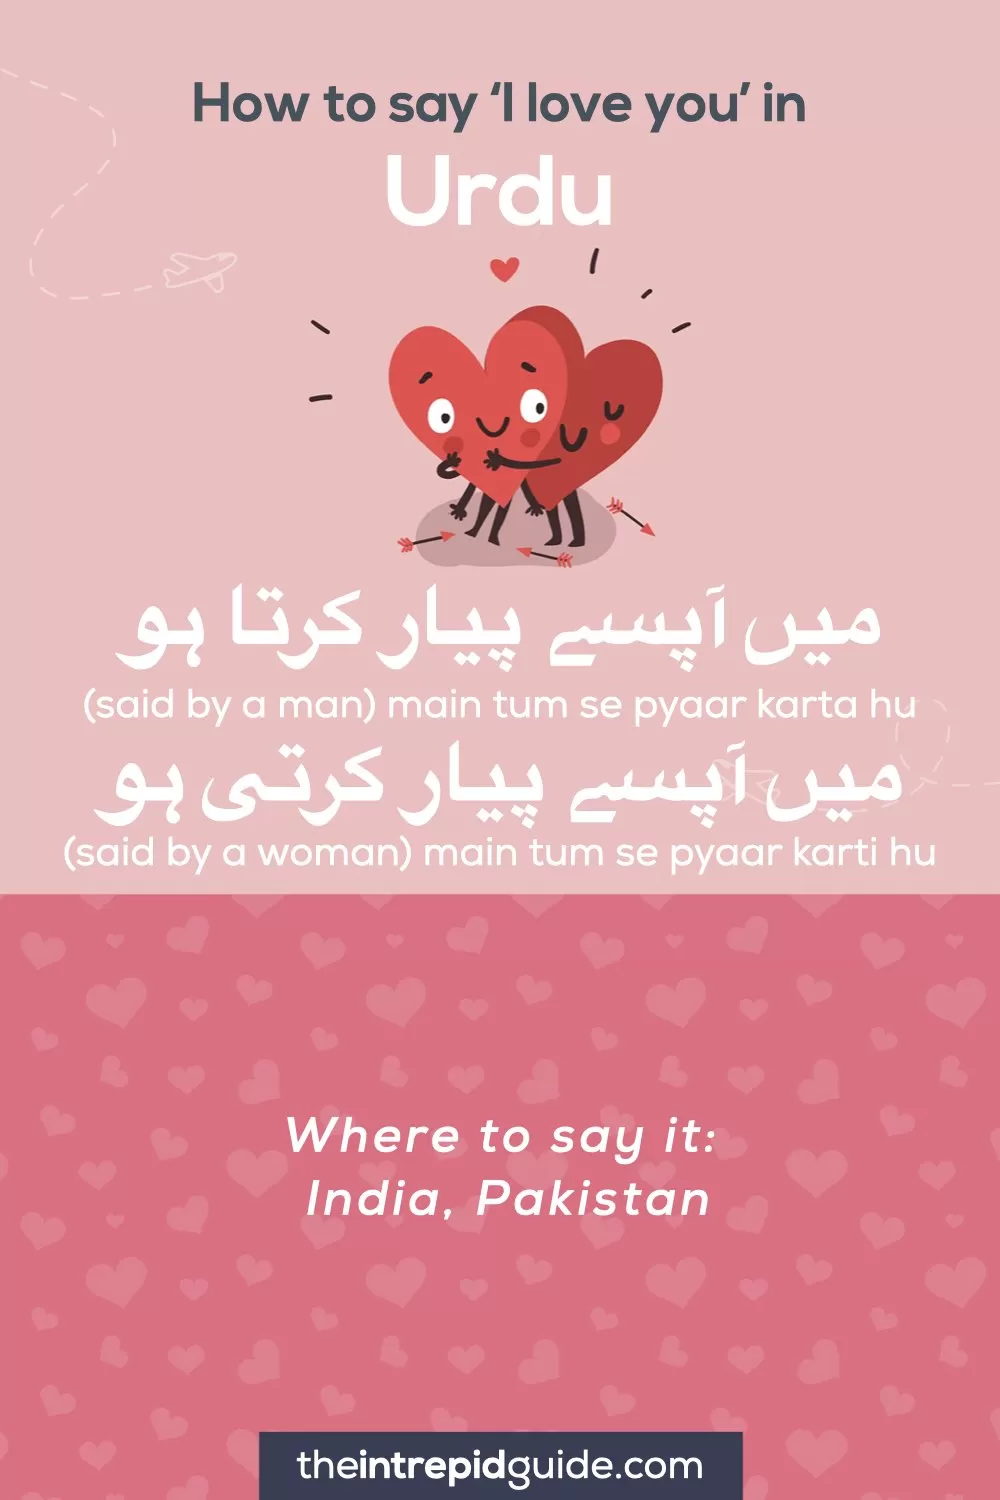 How to say I love you in different languages - Urdu - میں آپسے پیار کرتا ہو (said by a man), میں آپسے پیار کرتی ہو (said by a woman)